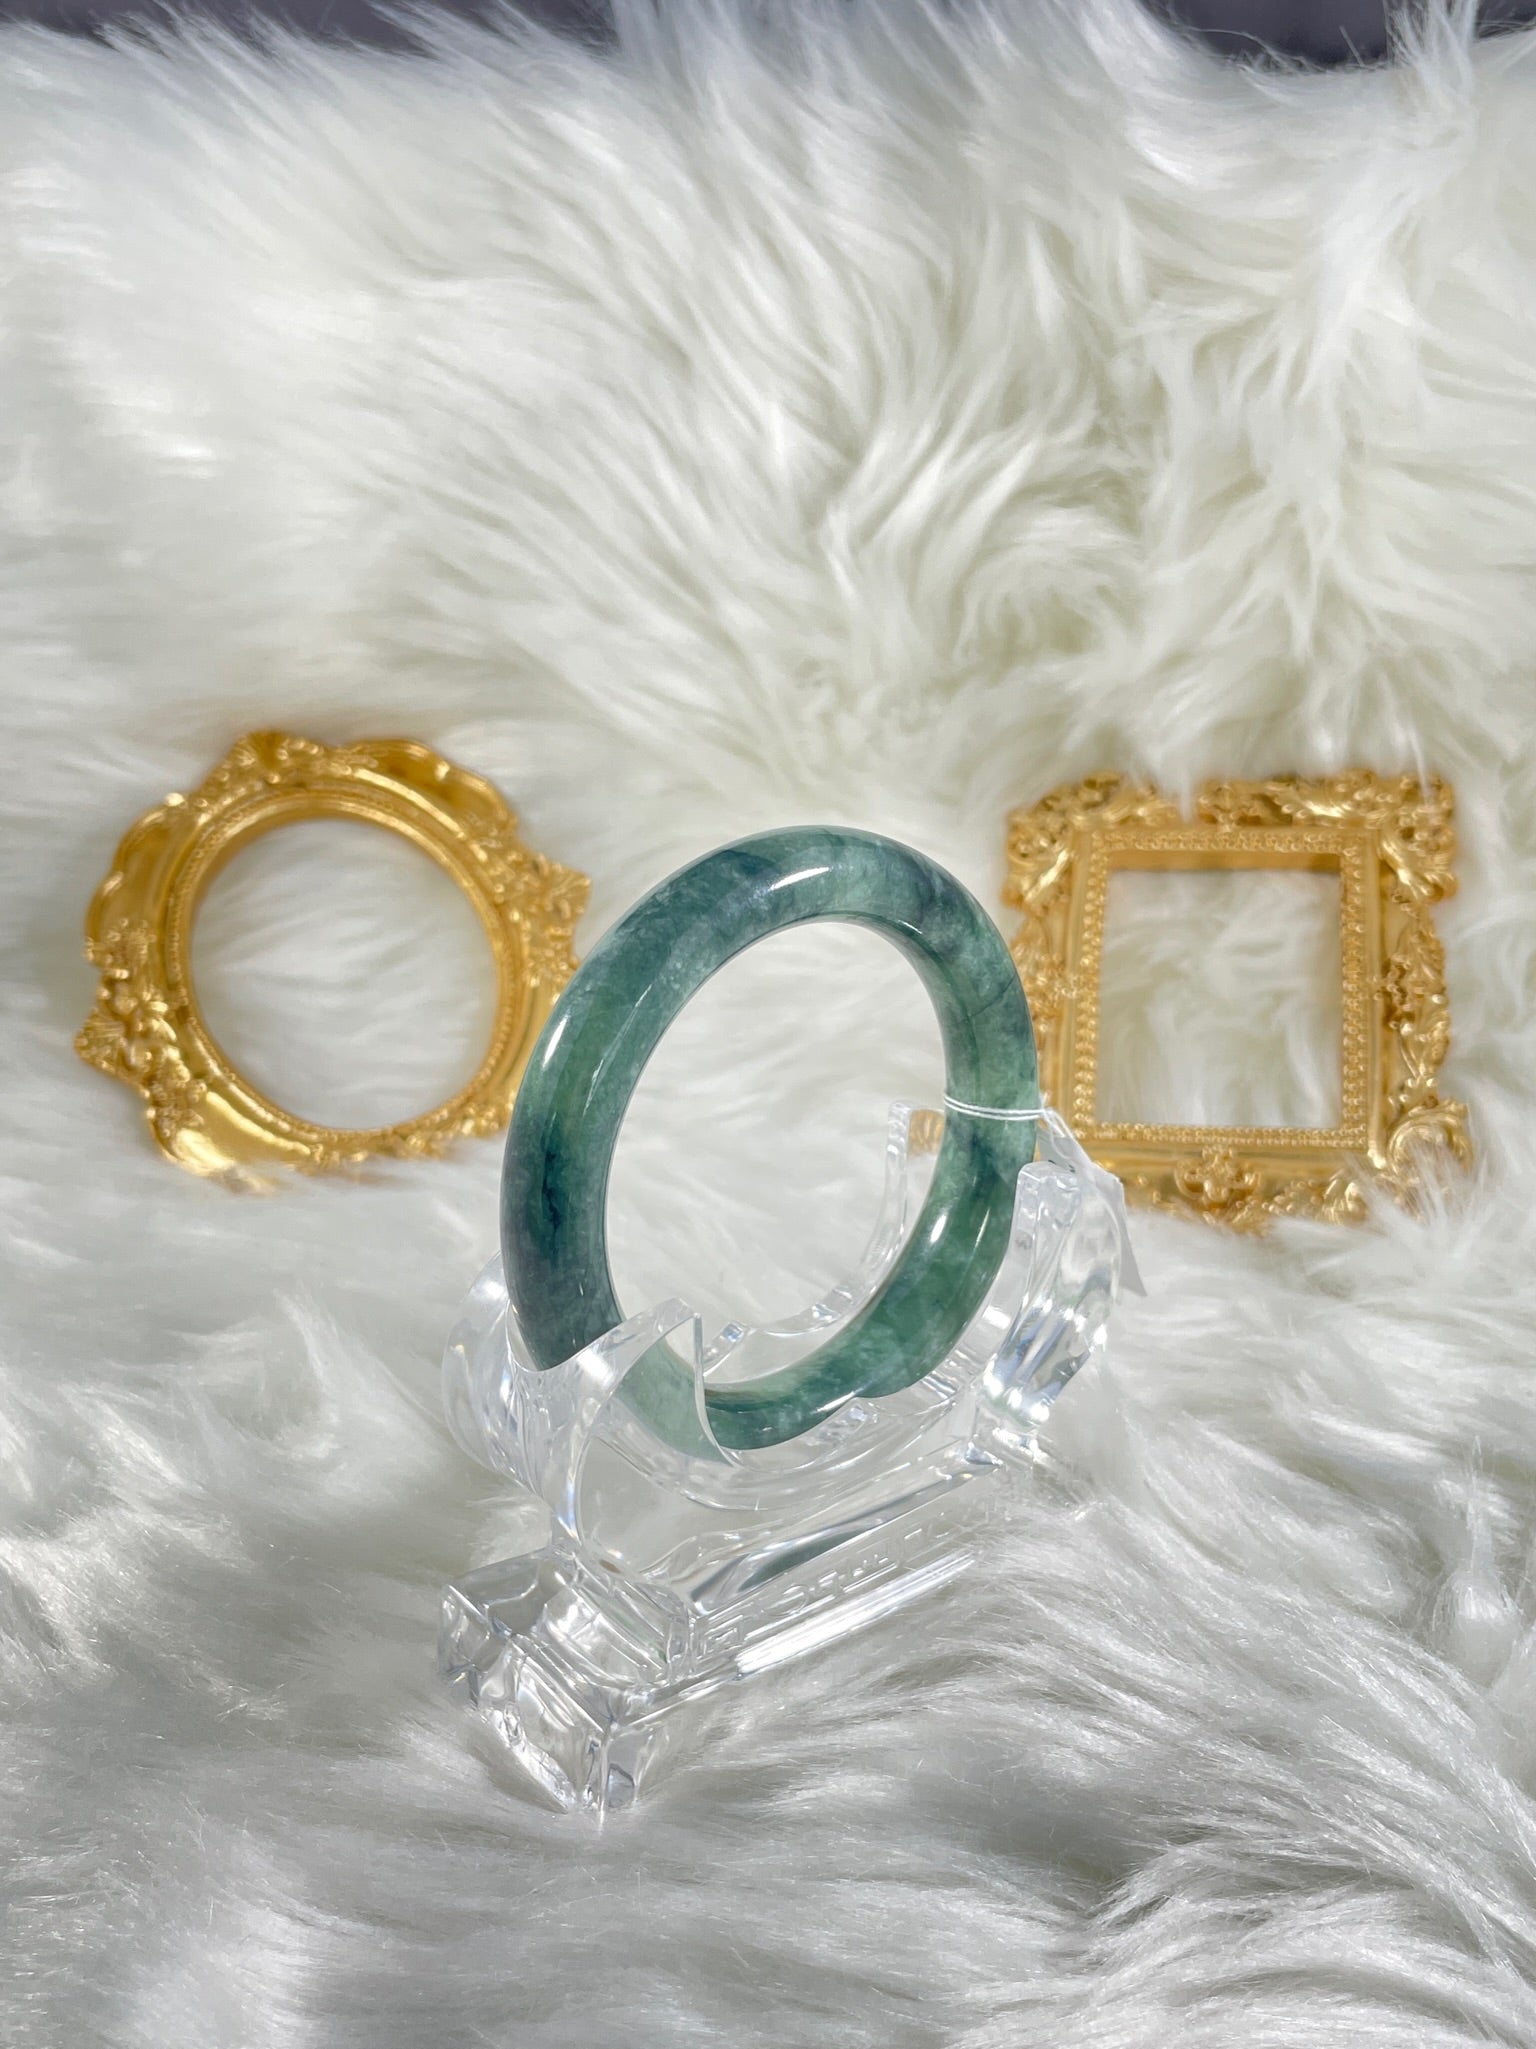 Grade A Natural Jade Bangle with certificate #36389